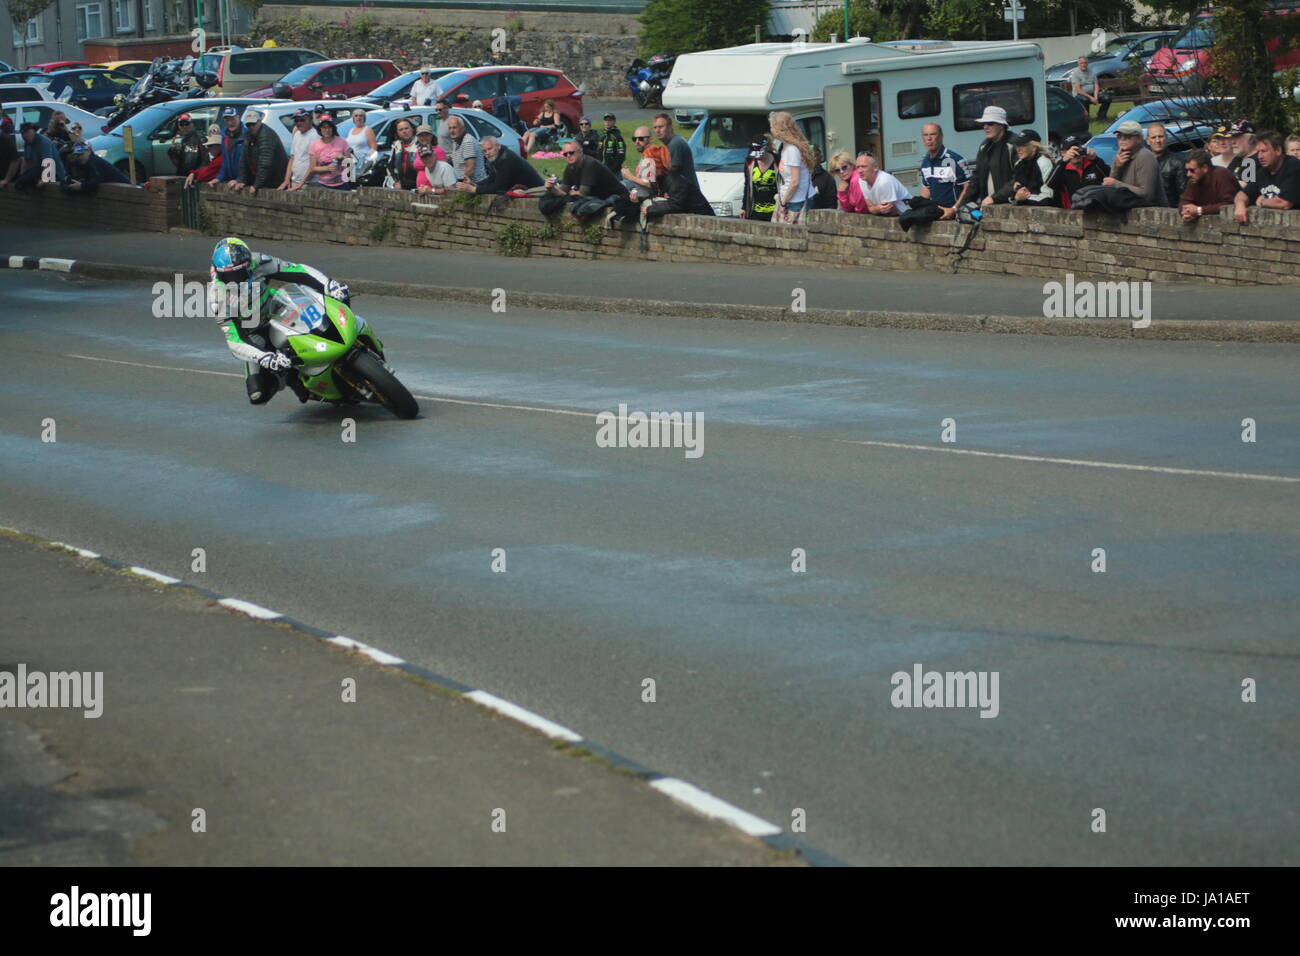 Isle of Man TT Races, Qualifying Practice Race, Saturday 3 June 2017.Sidecar Qualifying and Supersport qualifying session. Number 18, Martin Jessop of the Riders Motorcycles team from Yeovil, UK on a 675cc Triumph. Credit: Eclectic Art and Photography/Alamy Live News Stock Photo